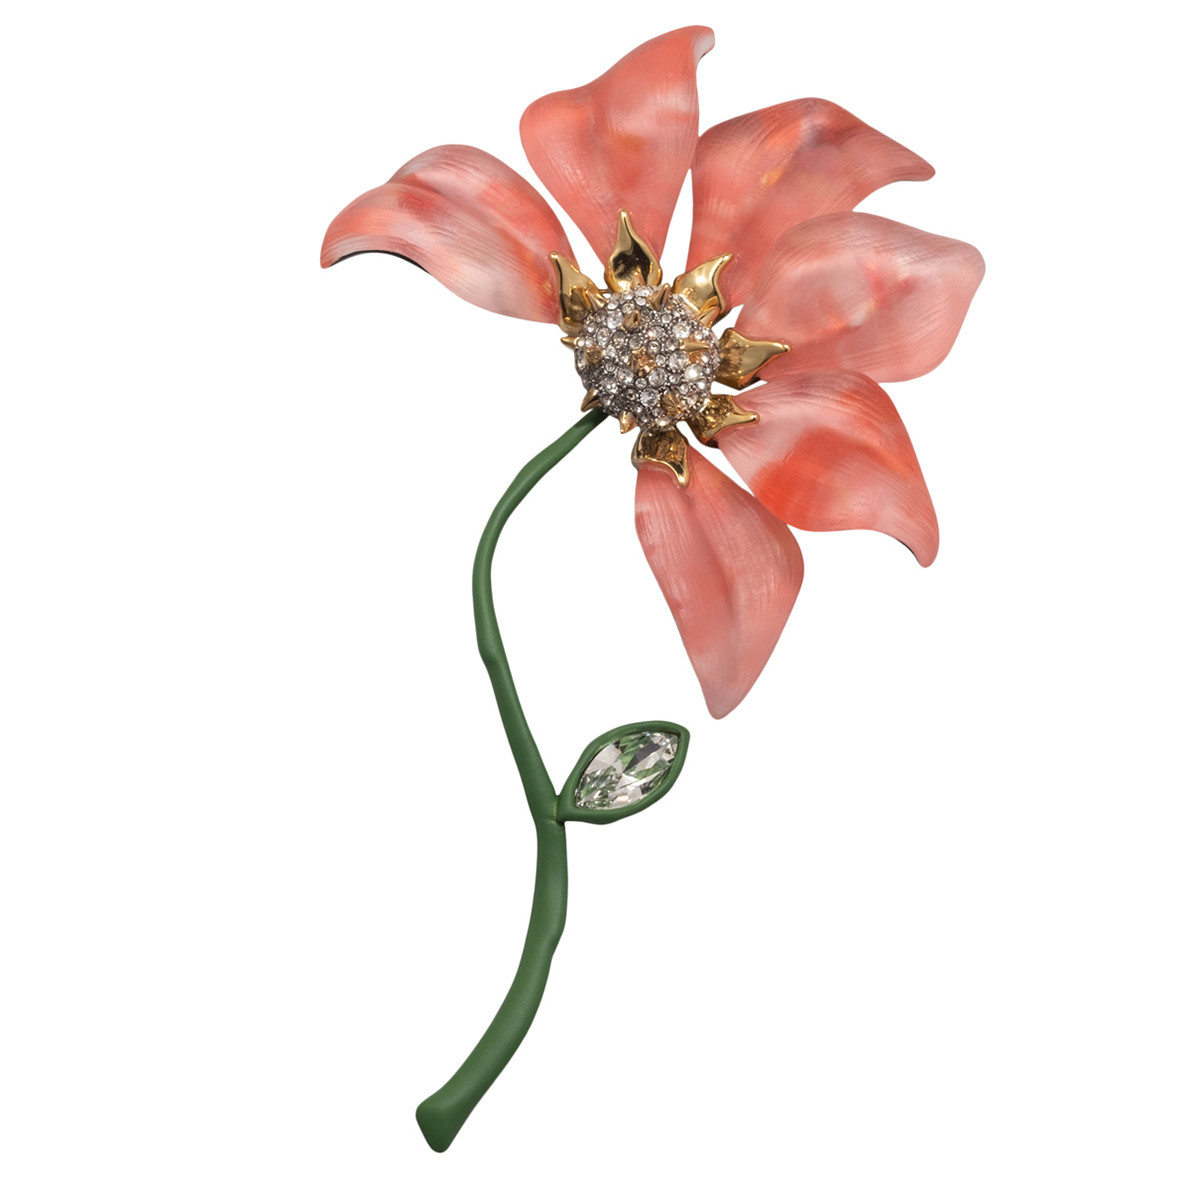 Alexis Bittar: Solanales Crystal Lake Lucite Flower Stem Pin- Sunset Flower, tomfoolery